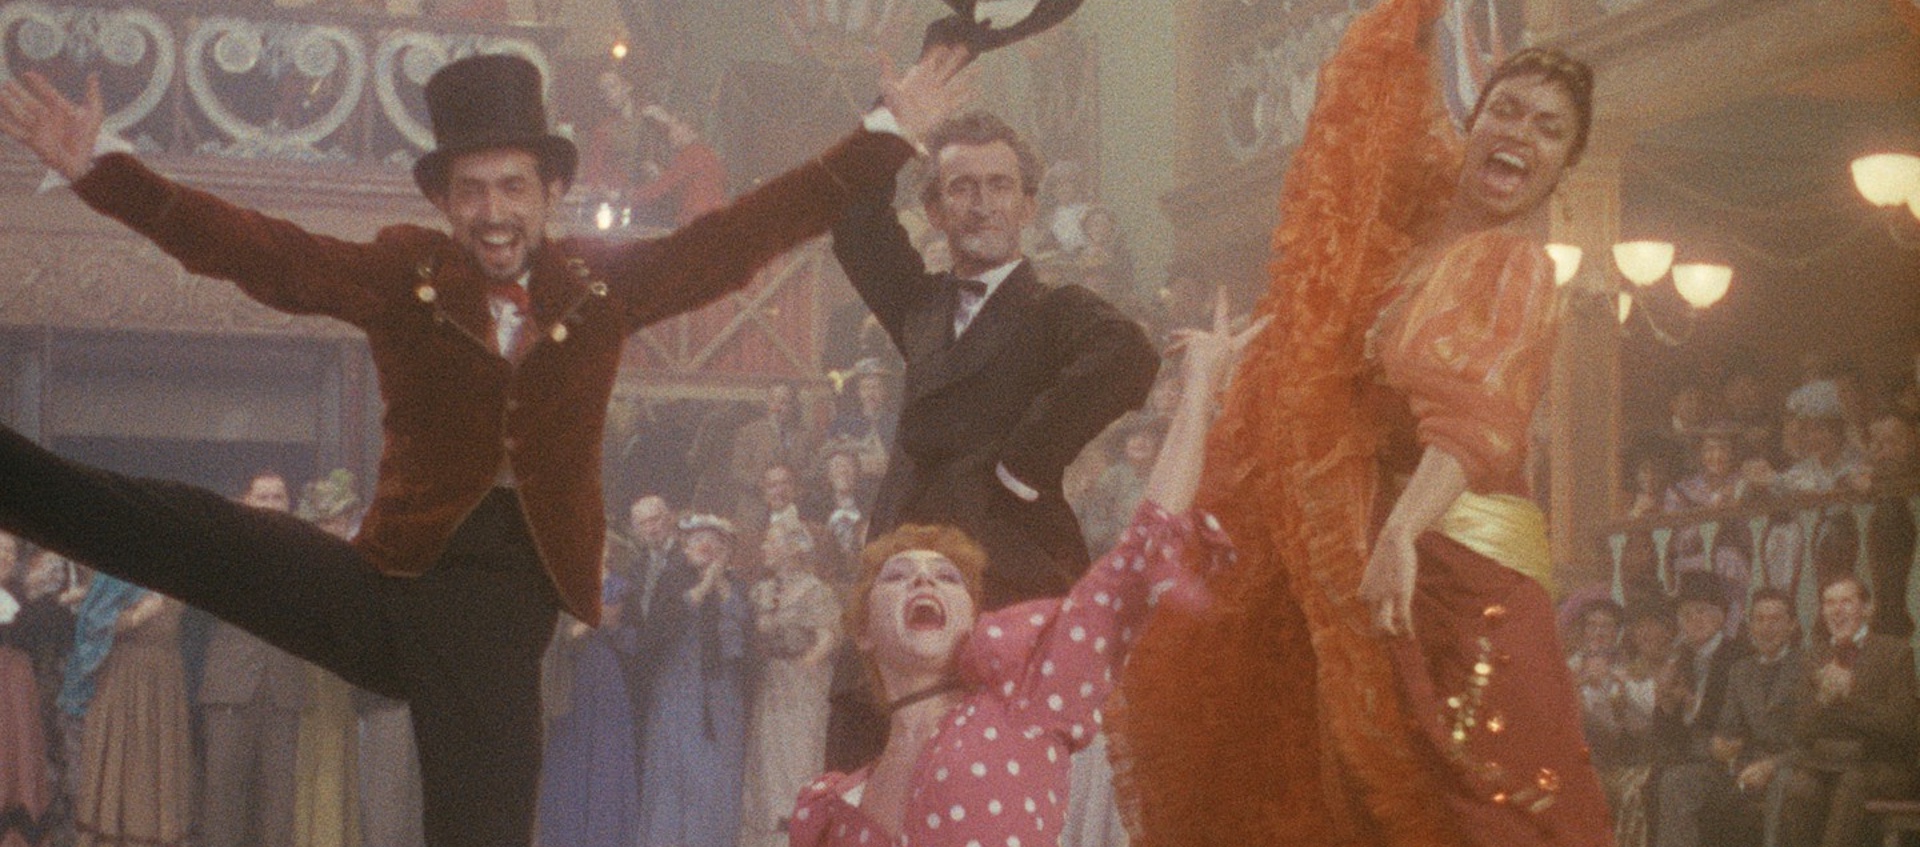 Two male and two female dancers in vintage dress face the camera with smiles and arms spread wide in a still from the 1952 John Huston film Moulin Rouge